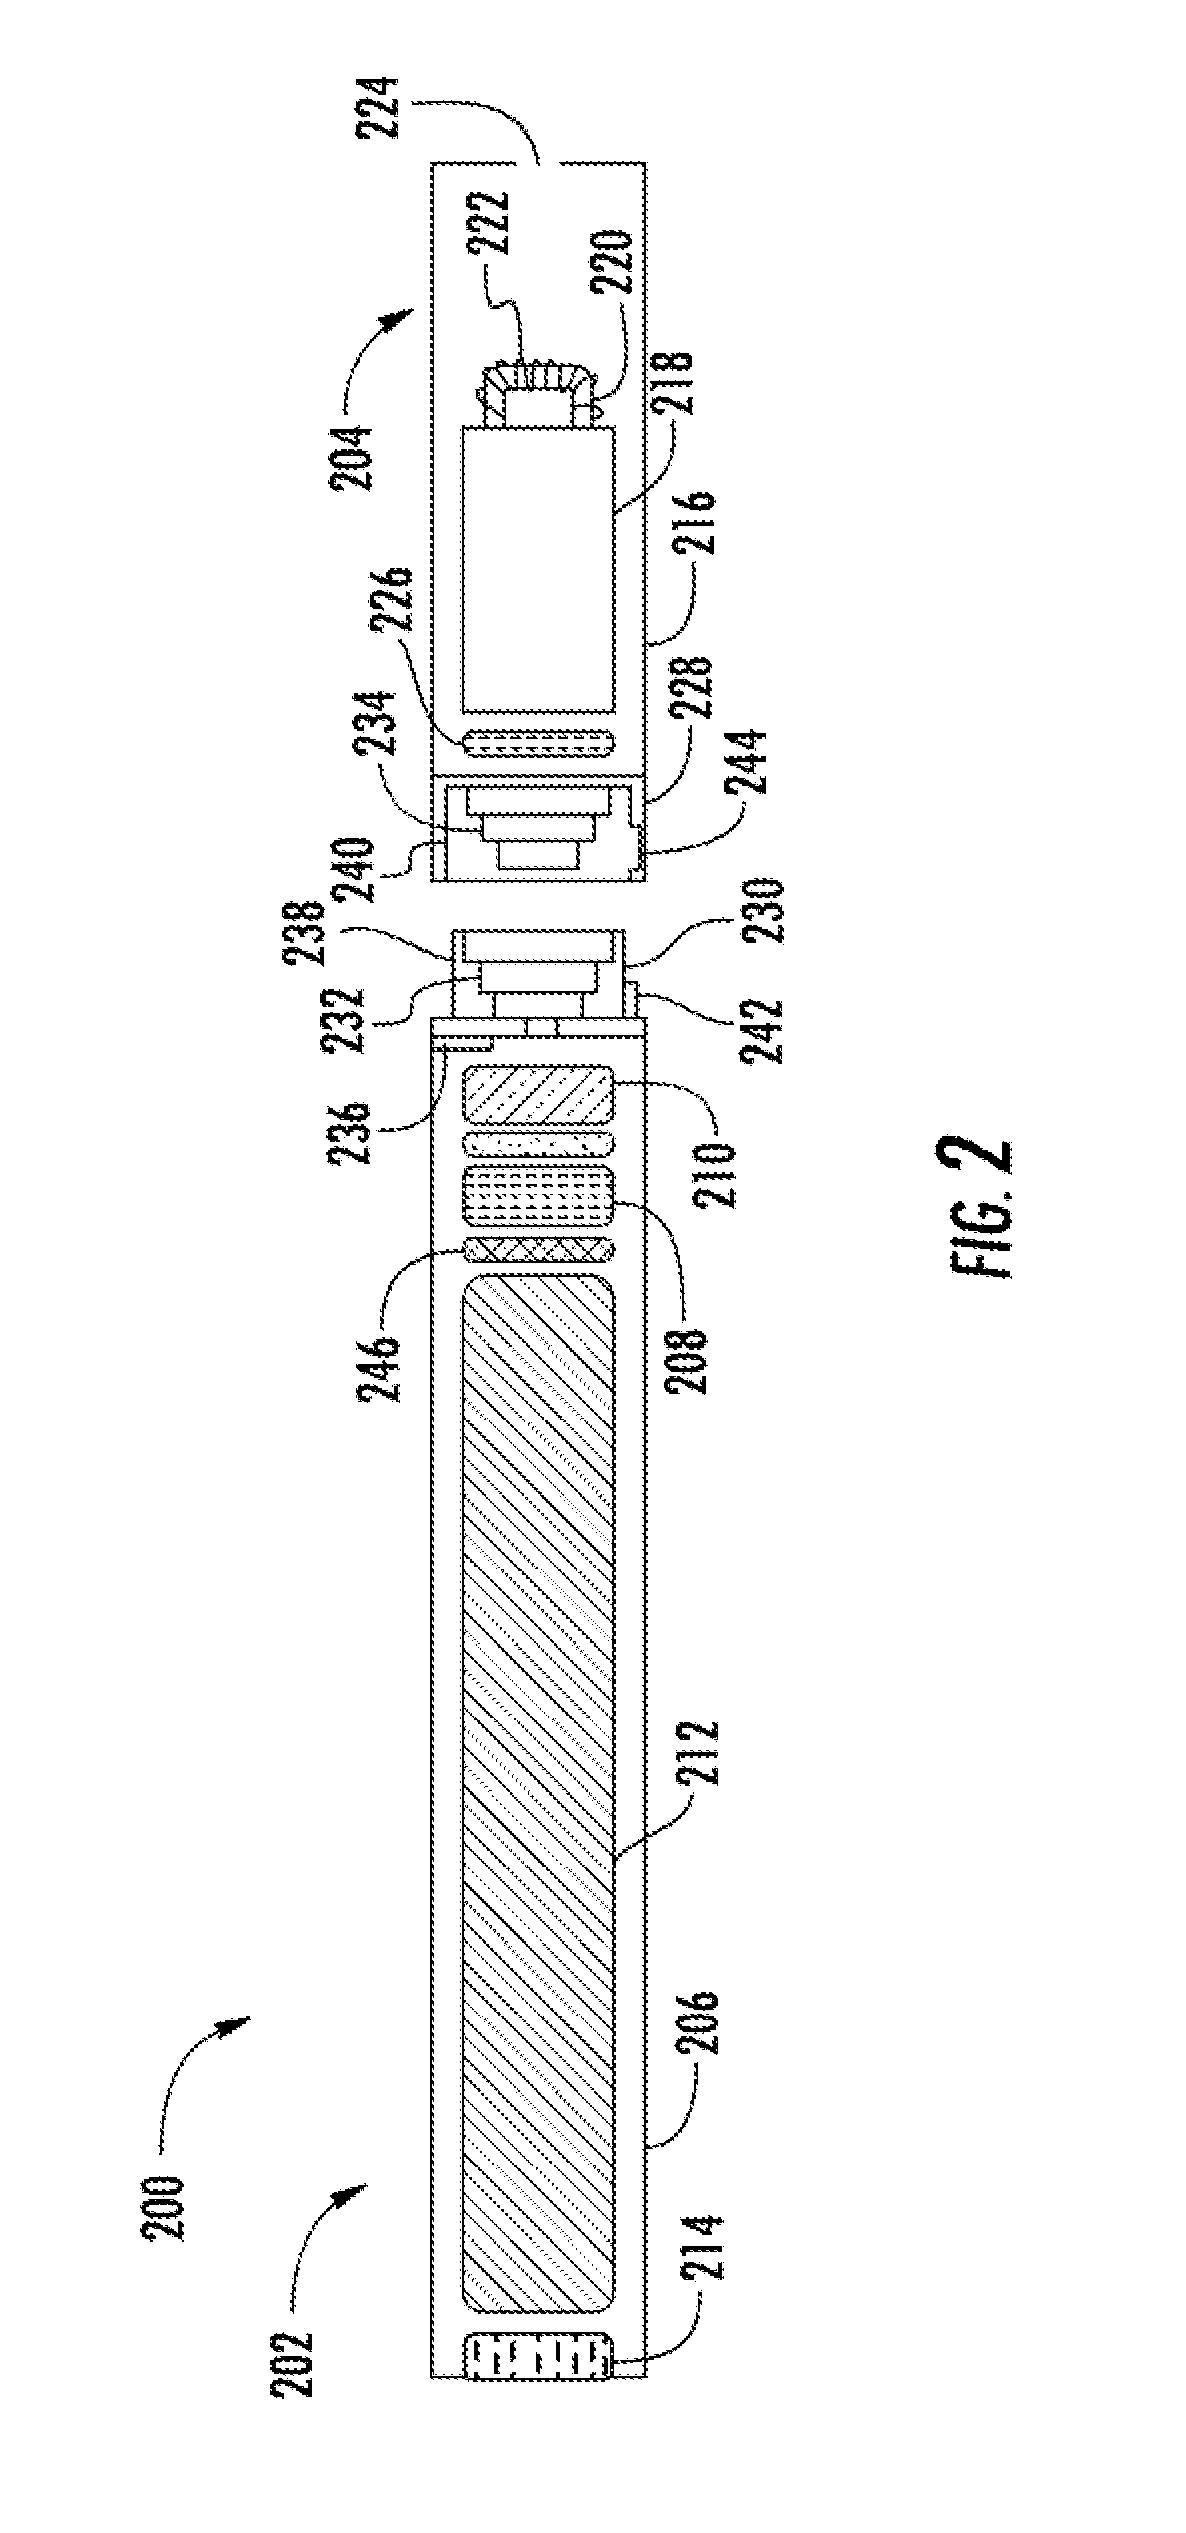 Application specific integrated circuit (ASIC) for an aerosol delivery device